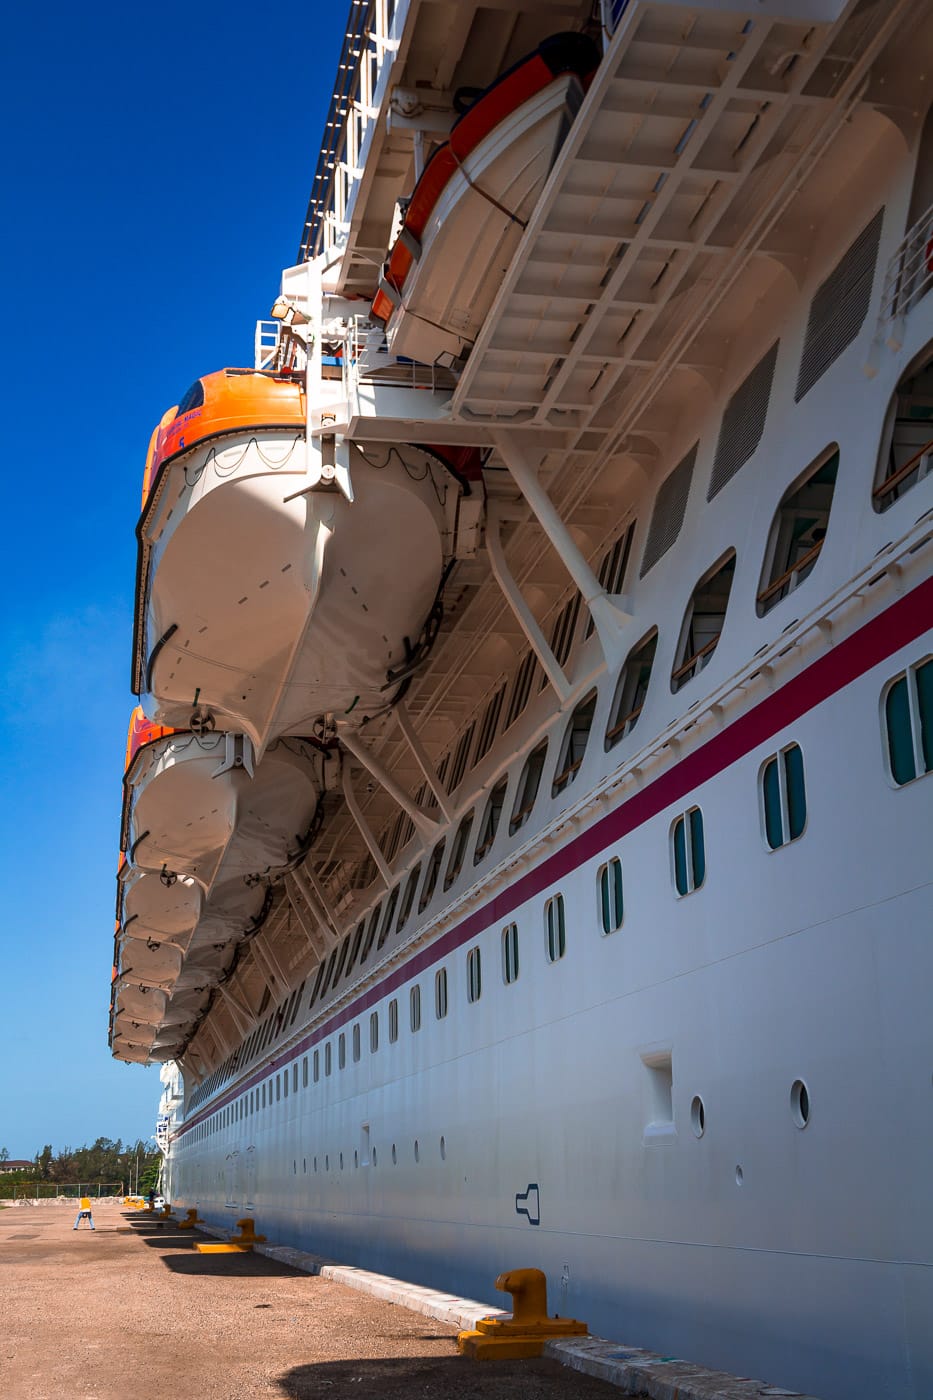 The starboard lifeboats of the cruise ship Carnival Magic while docked at Montego Bay, Jamaica.